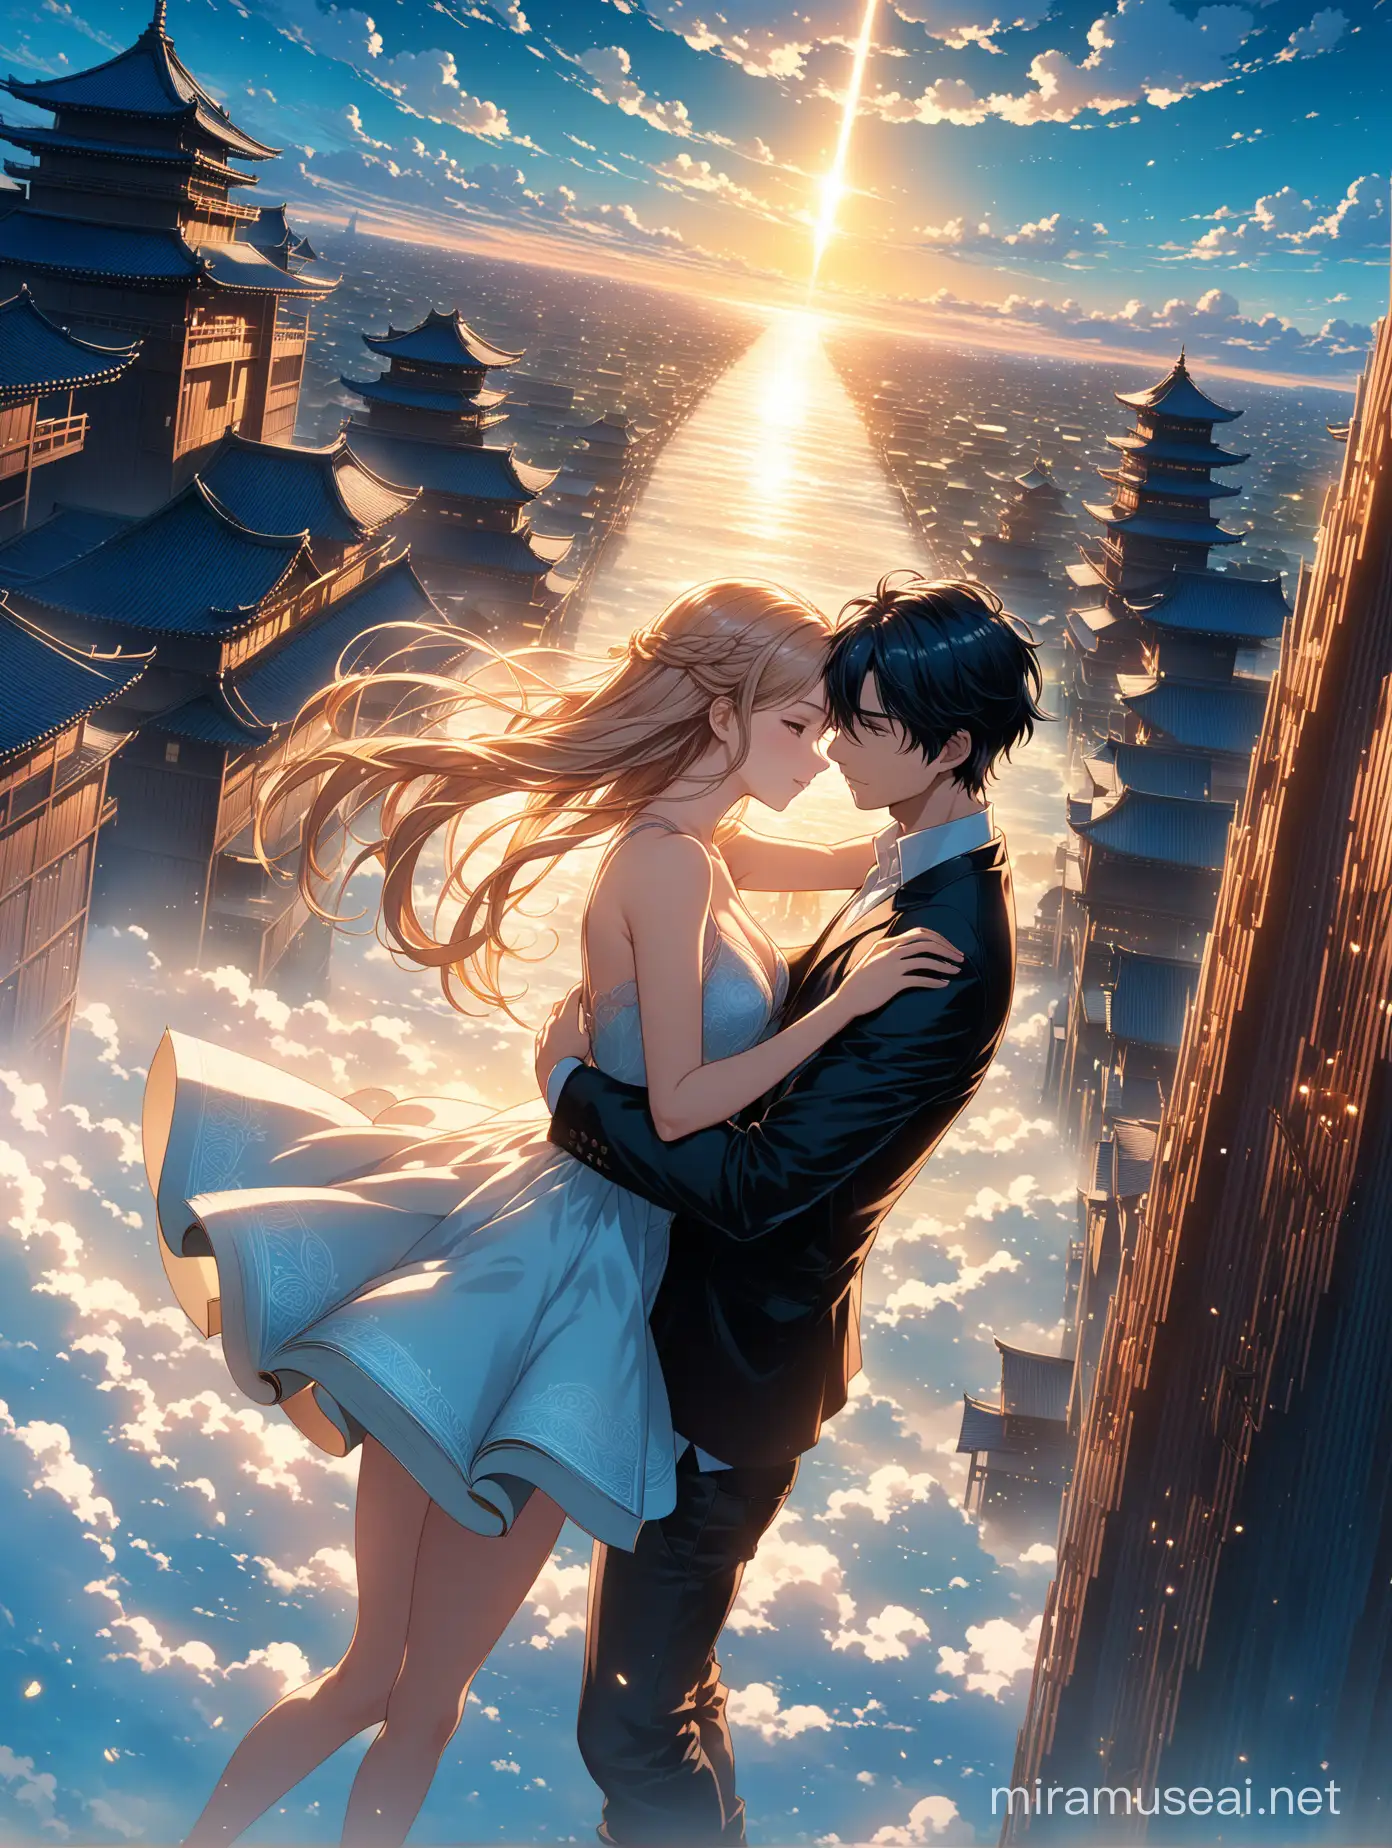 Shoujo Anime Love Story Ethereal Sky Embrace with Cinematic Lighting